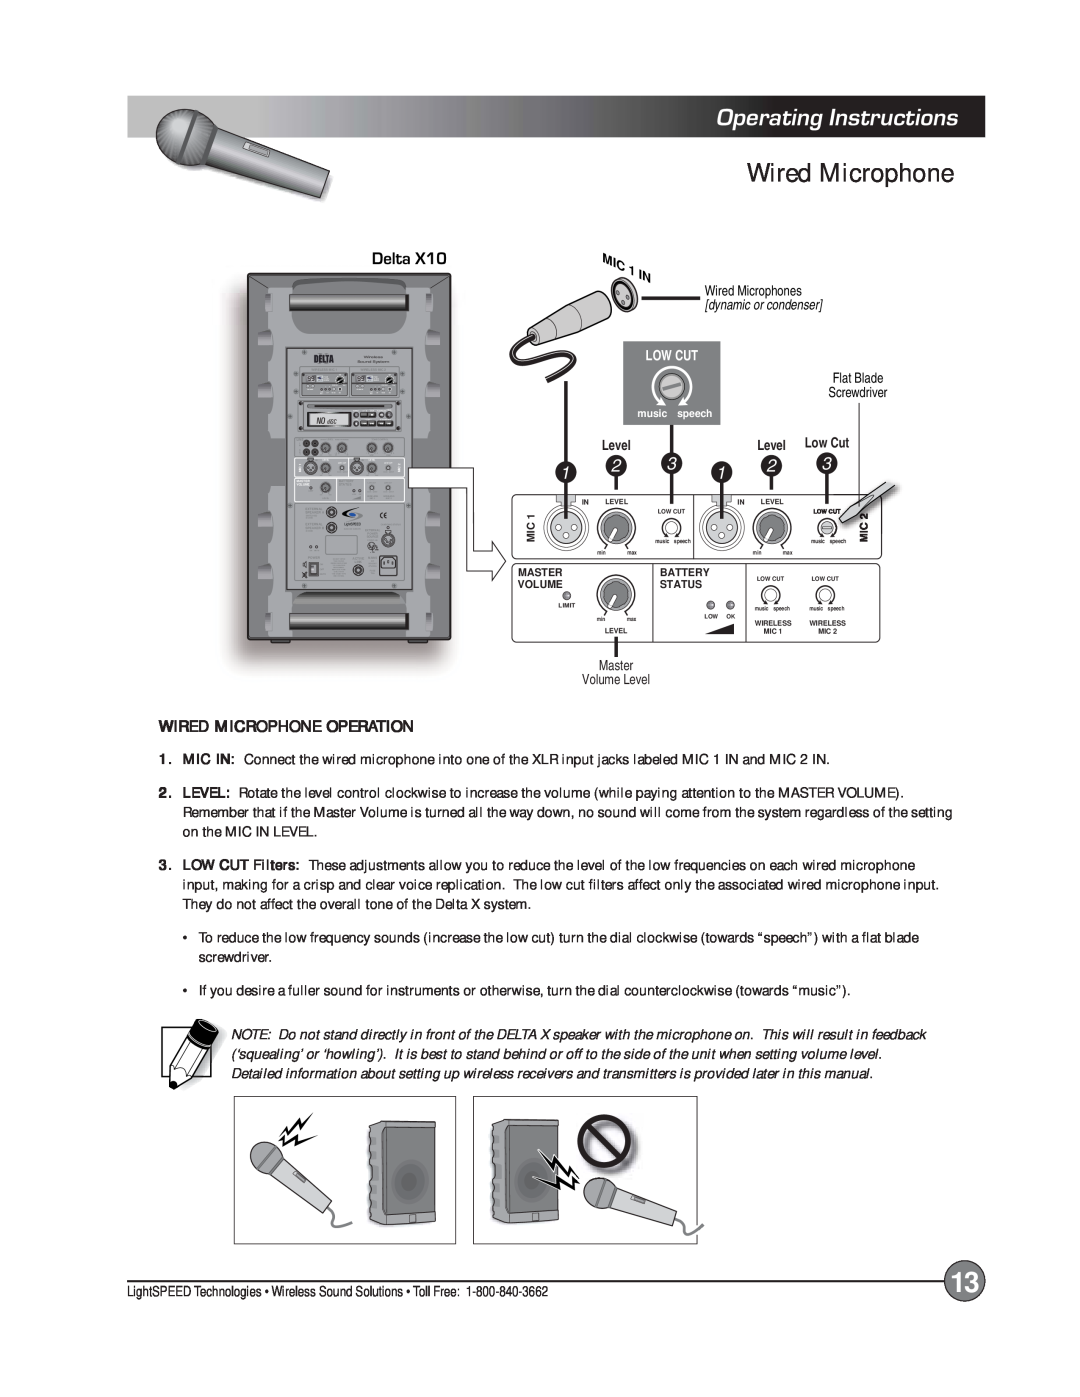 LightSpeed Technologies Delta X10, X12 manual Operating Instructions, Wired Microphone Operation 